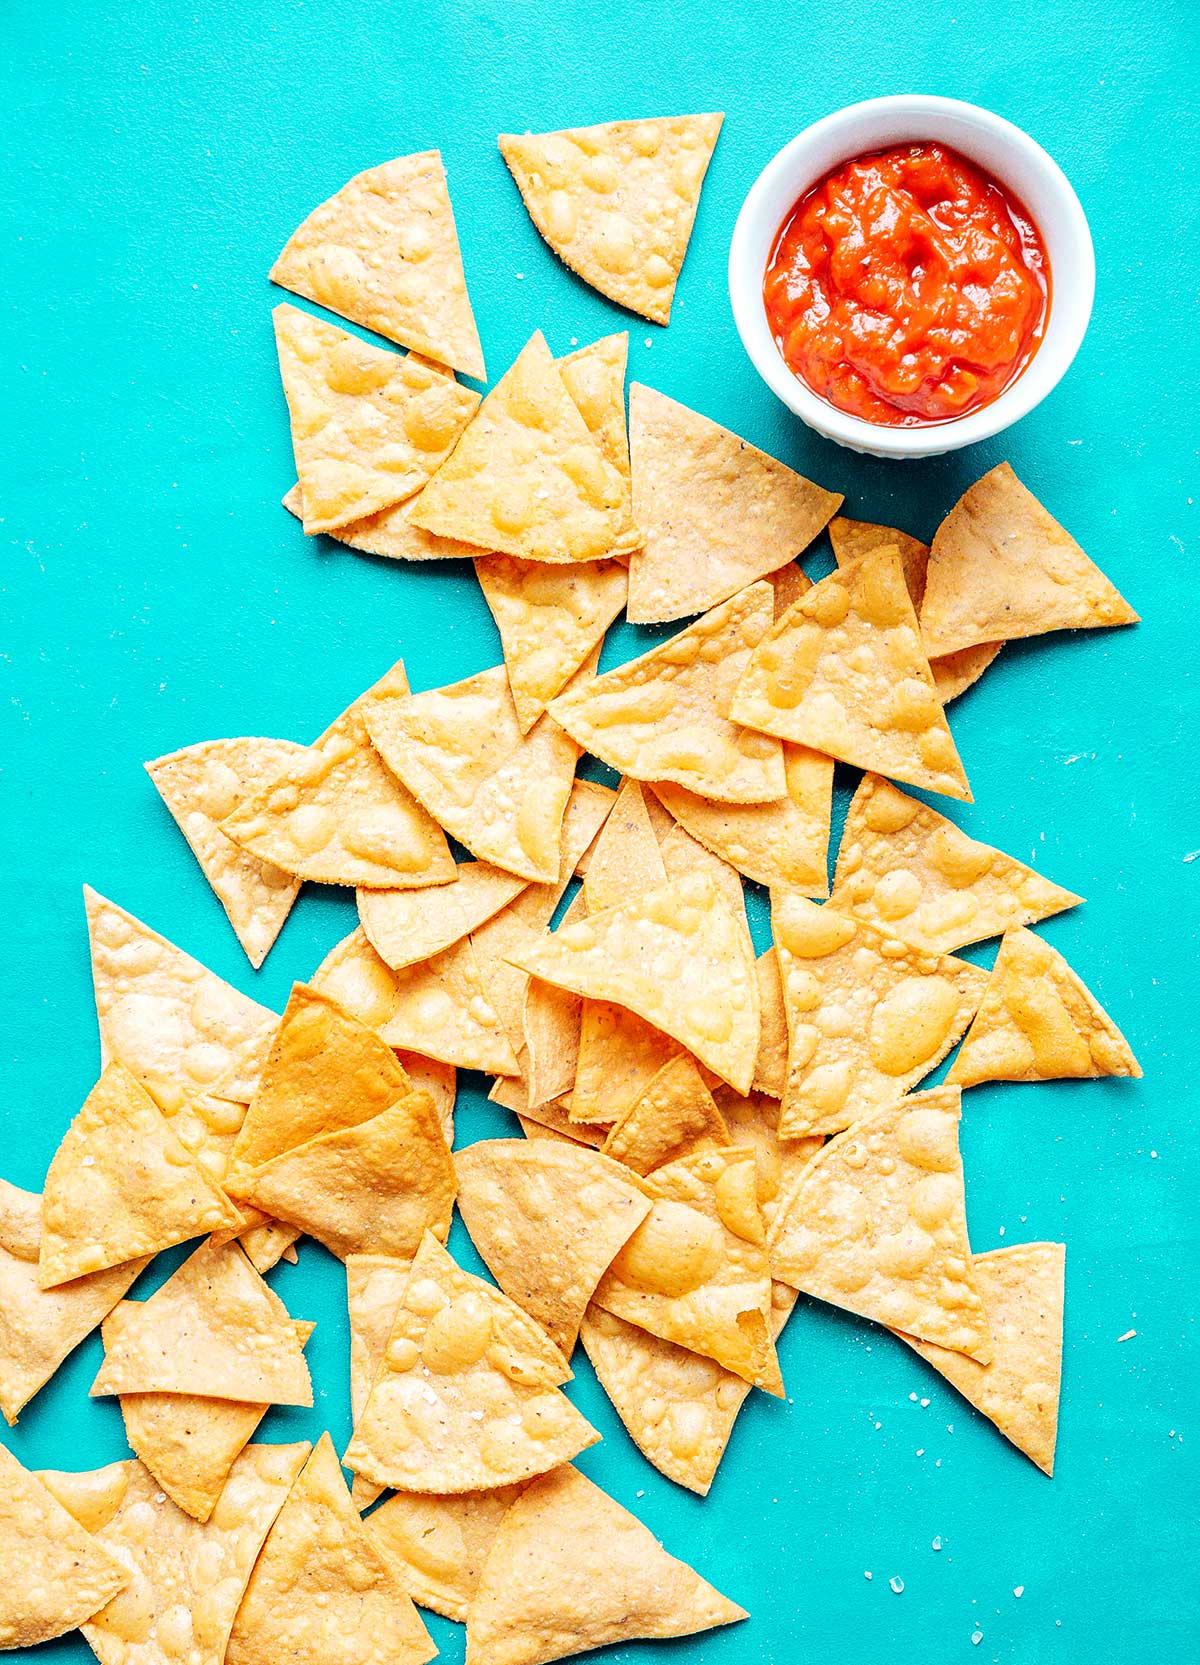 Tortilla chips on a blue background with salsa